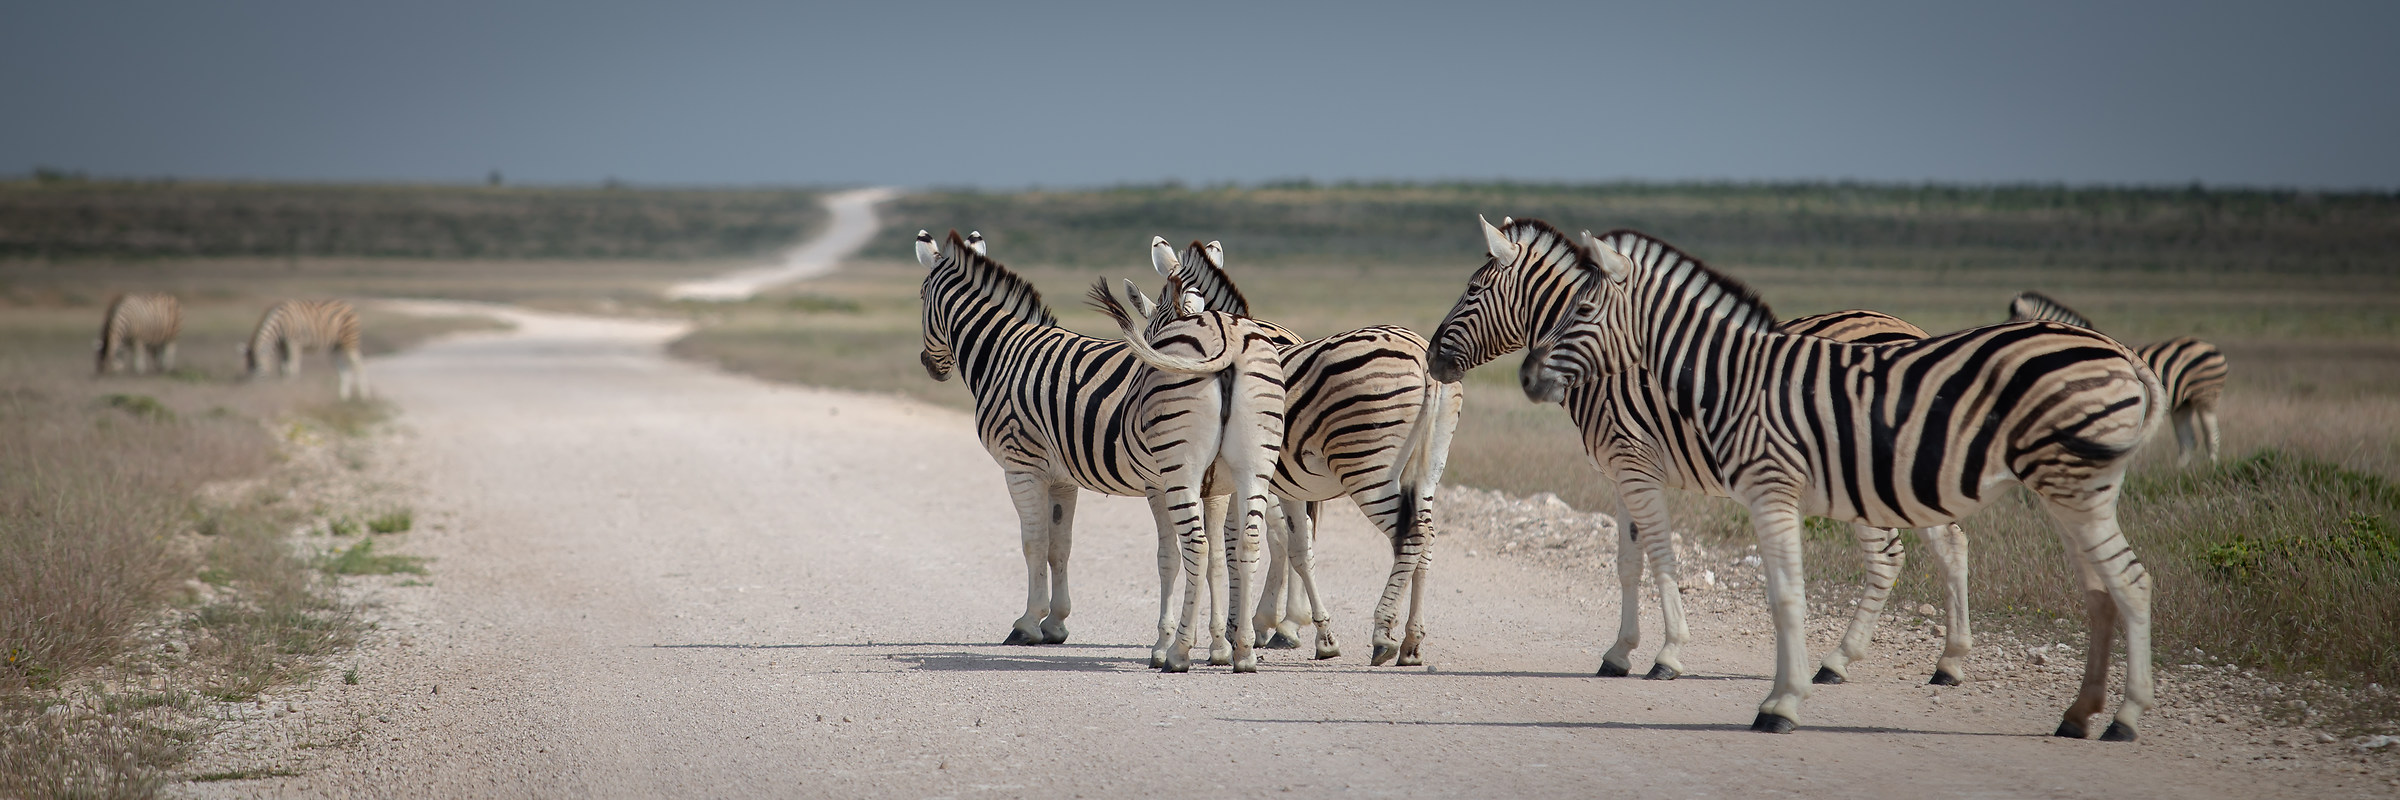 Zebras on the Road...